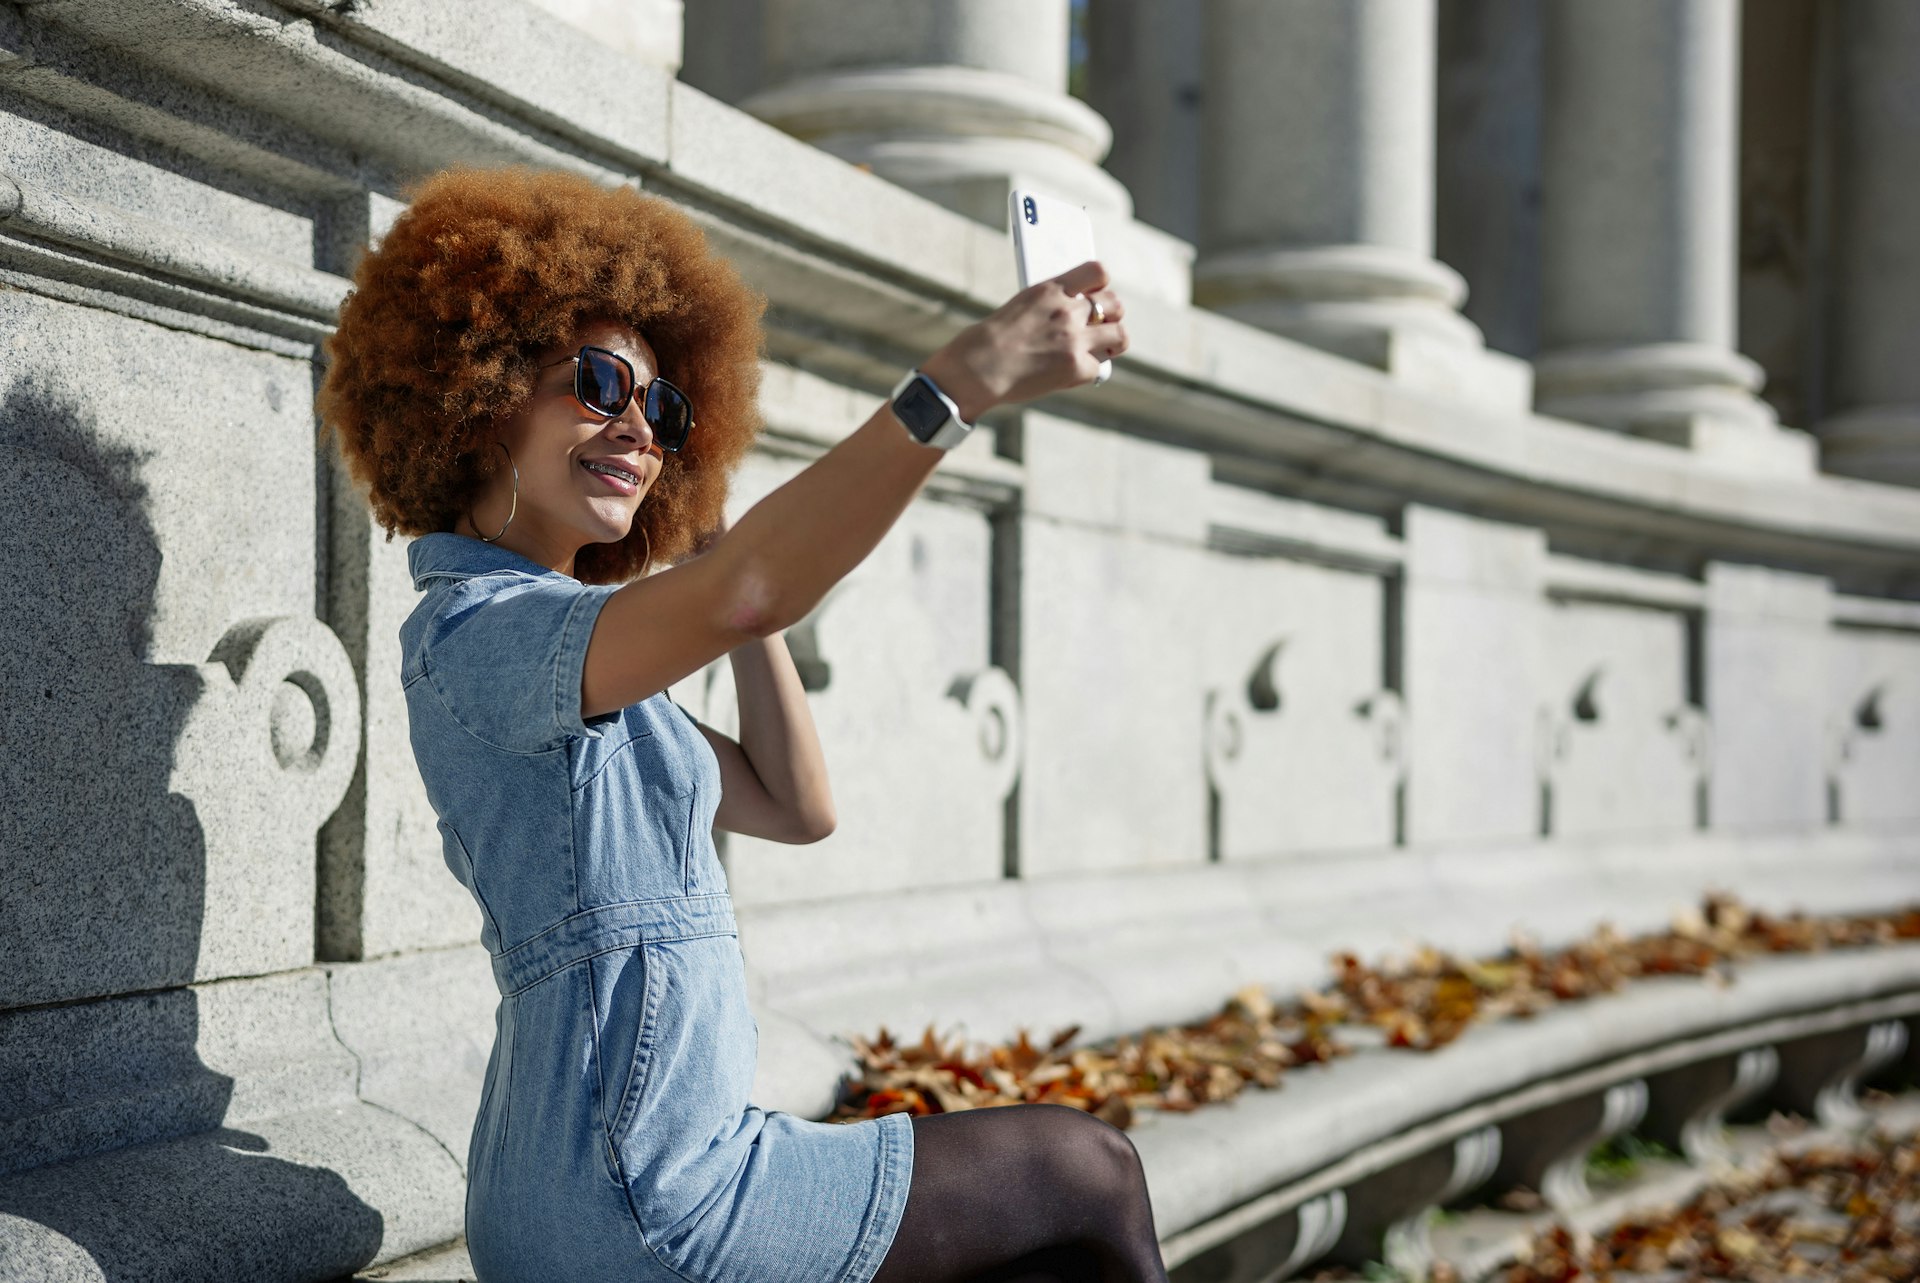 A young woman with an afro takes a selfie in the sun drenched Retiro Park in Spain